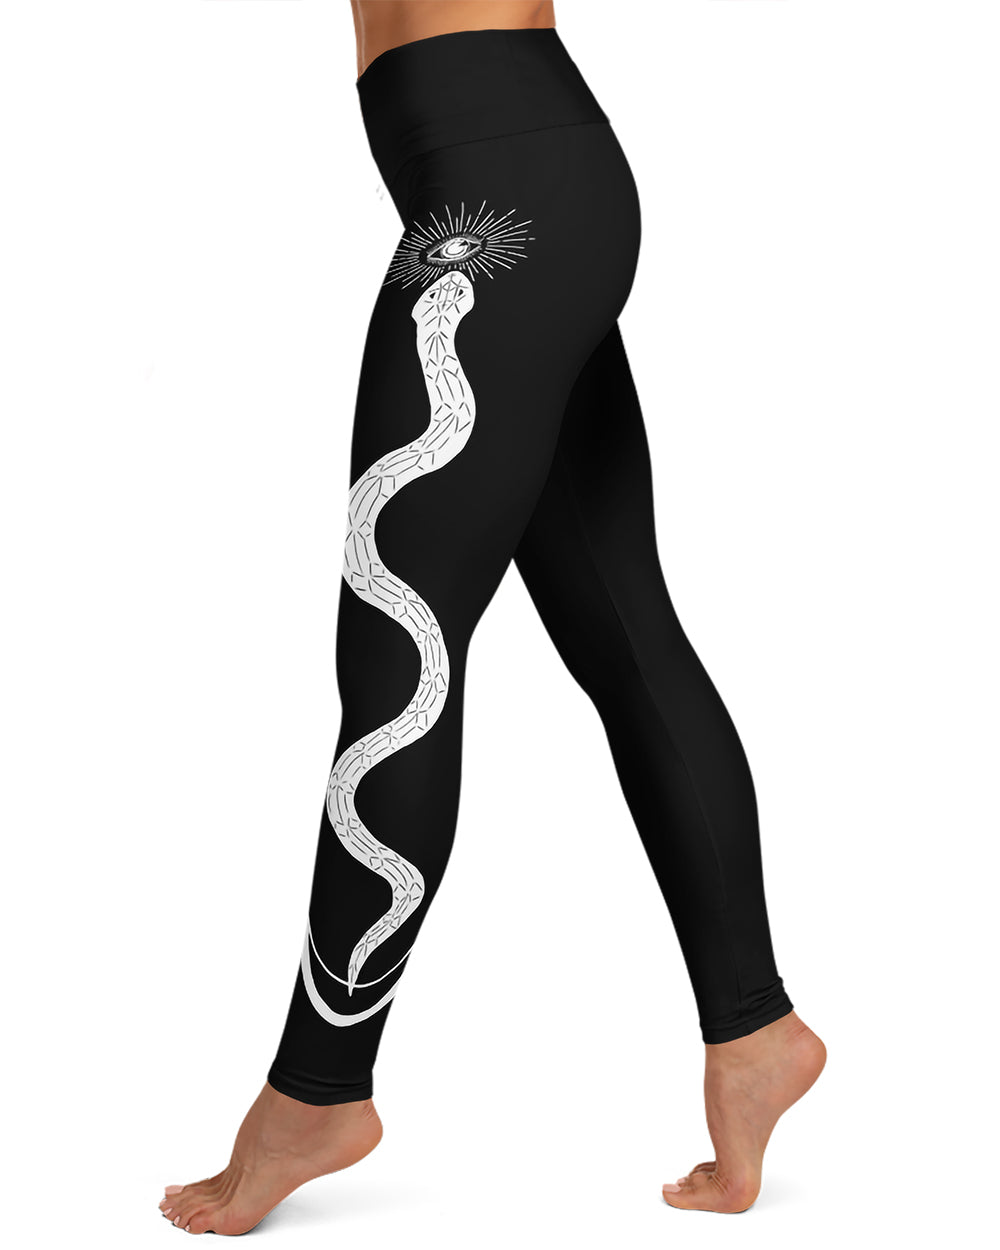 Snake Charmer Yoga Leggings  - UPF 50+ Protection from 98% of harmful rays - Vegan Gothic Clothing - Alternative Occult Ethical Fashion - On Demand Eco-friendly Sustainable Product